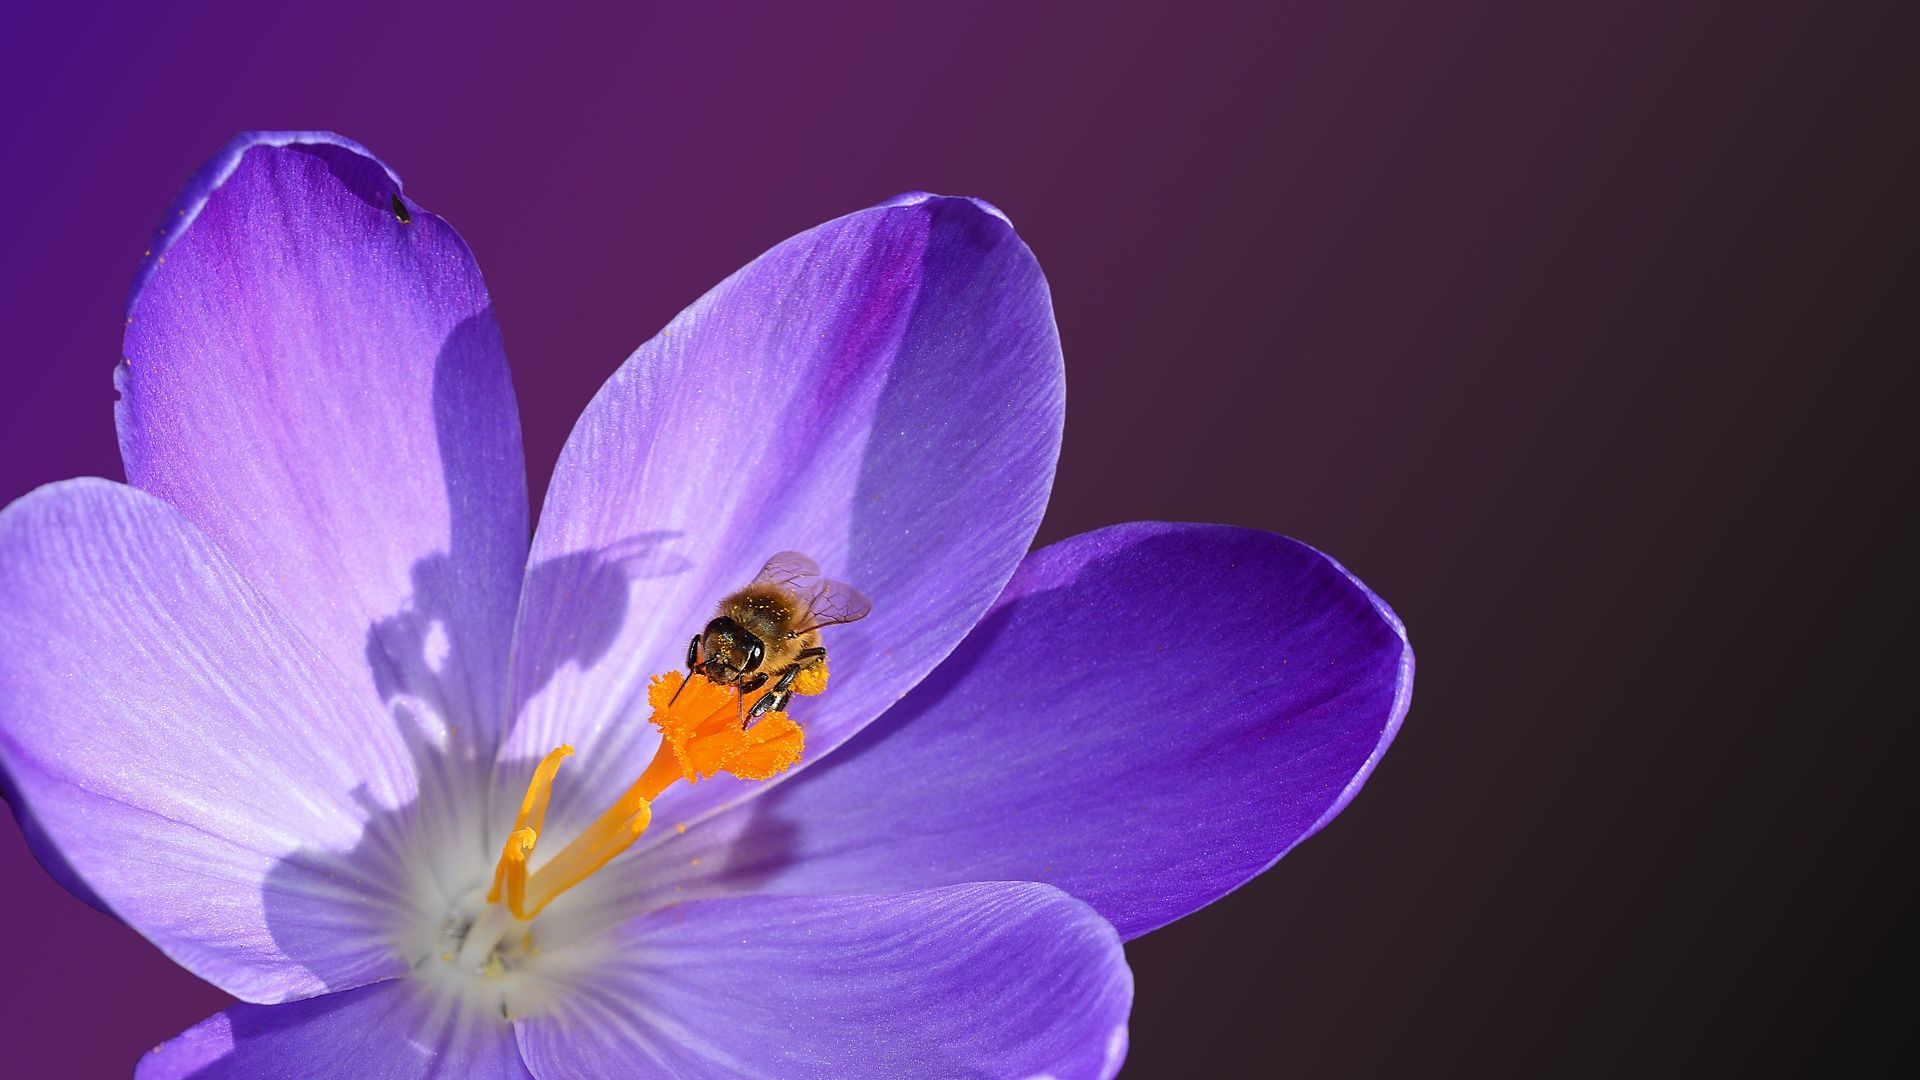 Wallpaper Crocus flower, bloom, bee, insect, close up